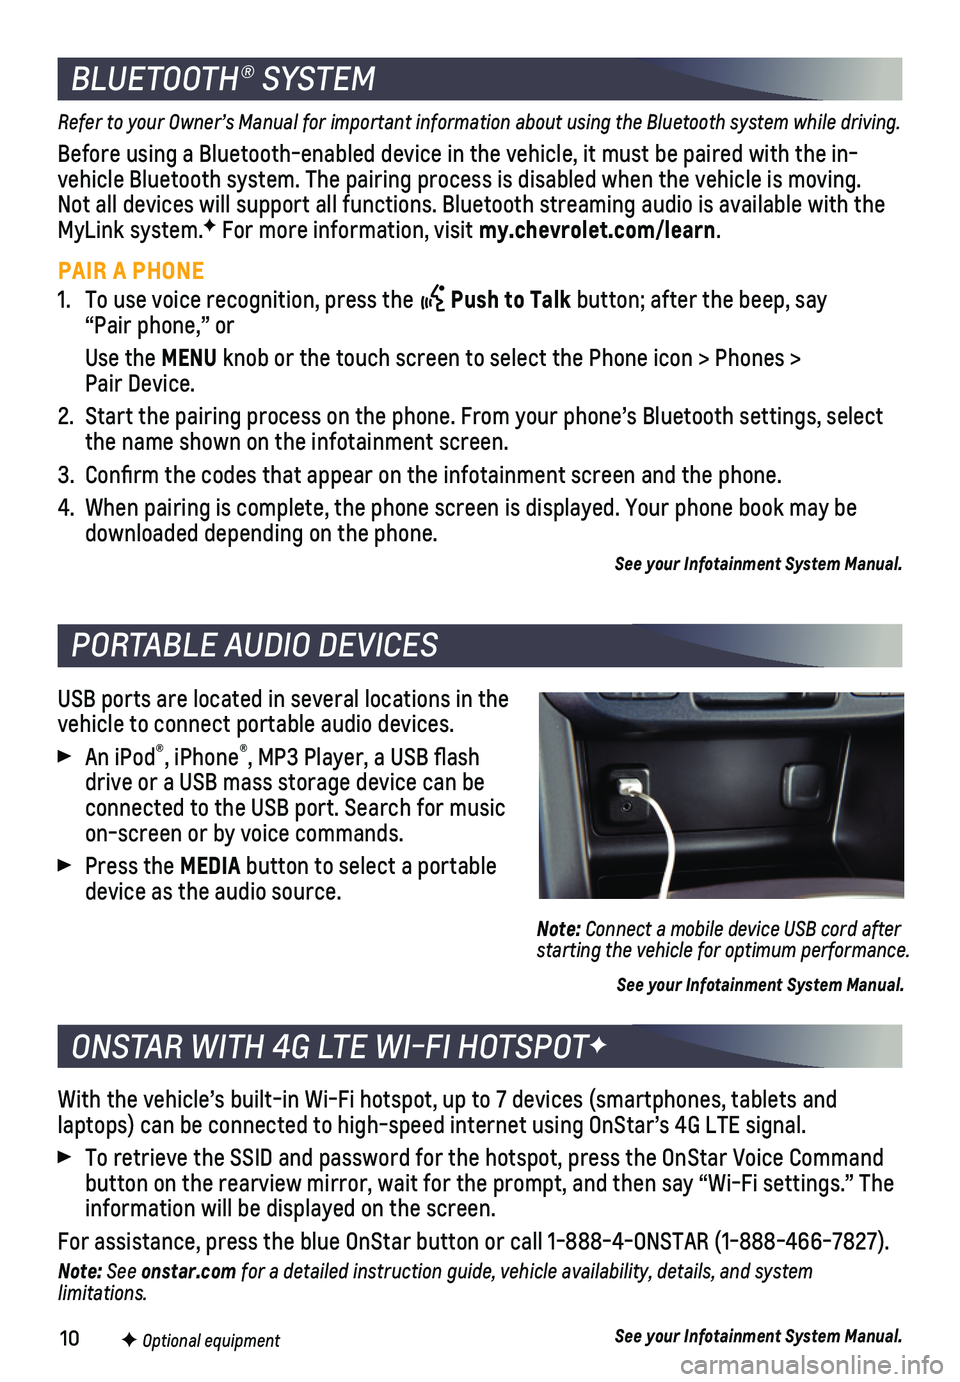 CHEVROLET COLORADO 2018  Get To Know Guide 10
USB ports are located in several locations in the vehicle to connect portable audio devices.
 An iPod®, iPhone®, MP3 Player, a USB flash drive or a USB mass storage device can be connected to the